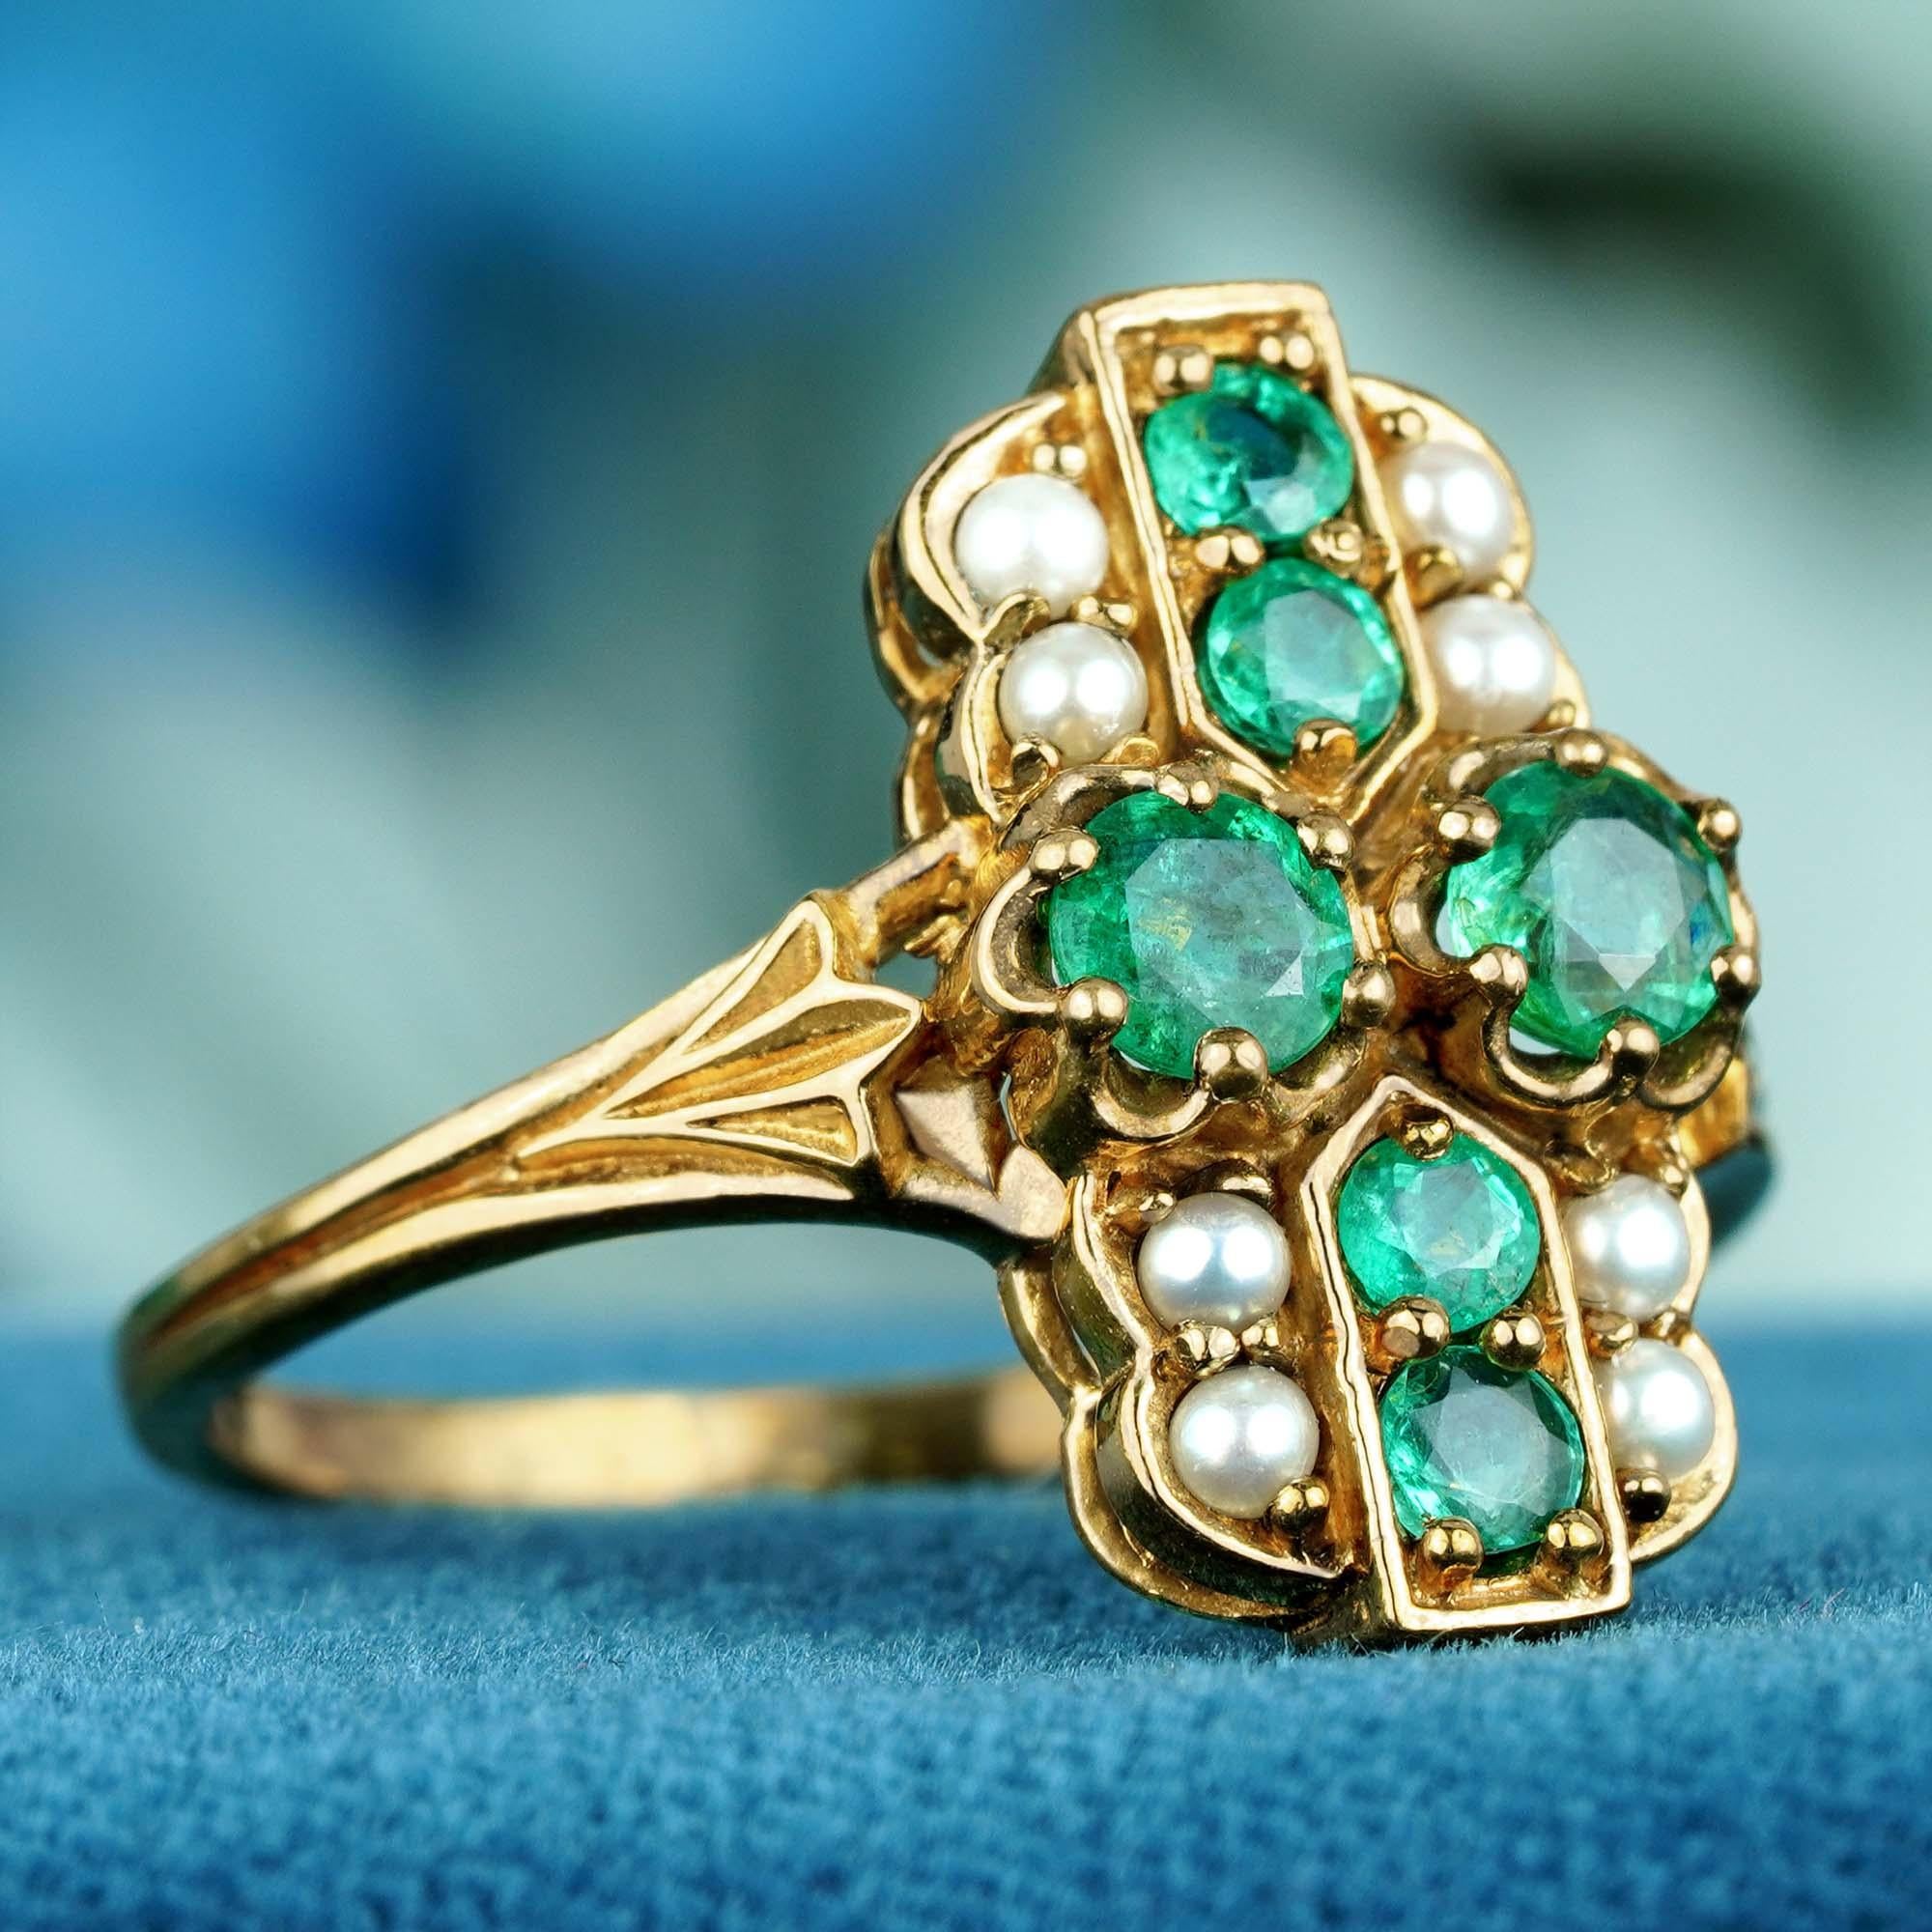 For Sale:  Natural Emerald and Pearl Vintage Style Ring in Solid 9K Gold 2